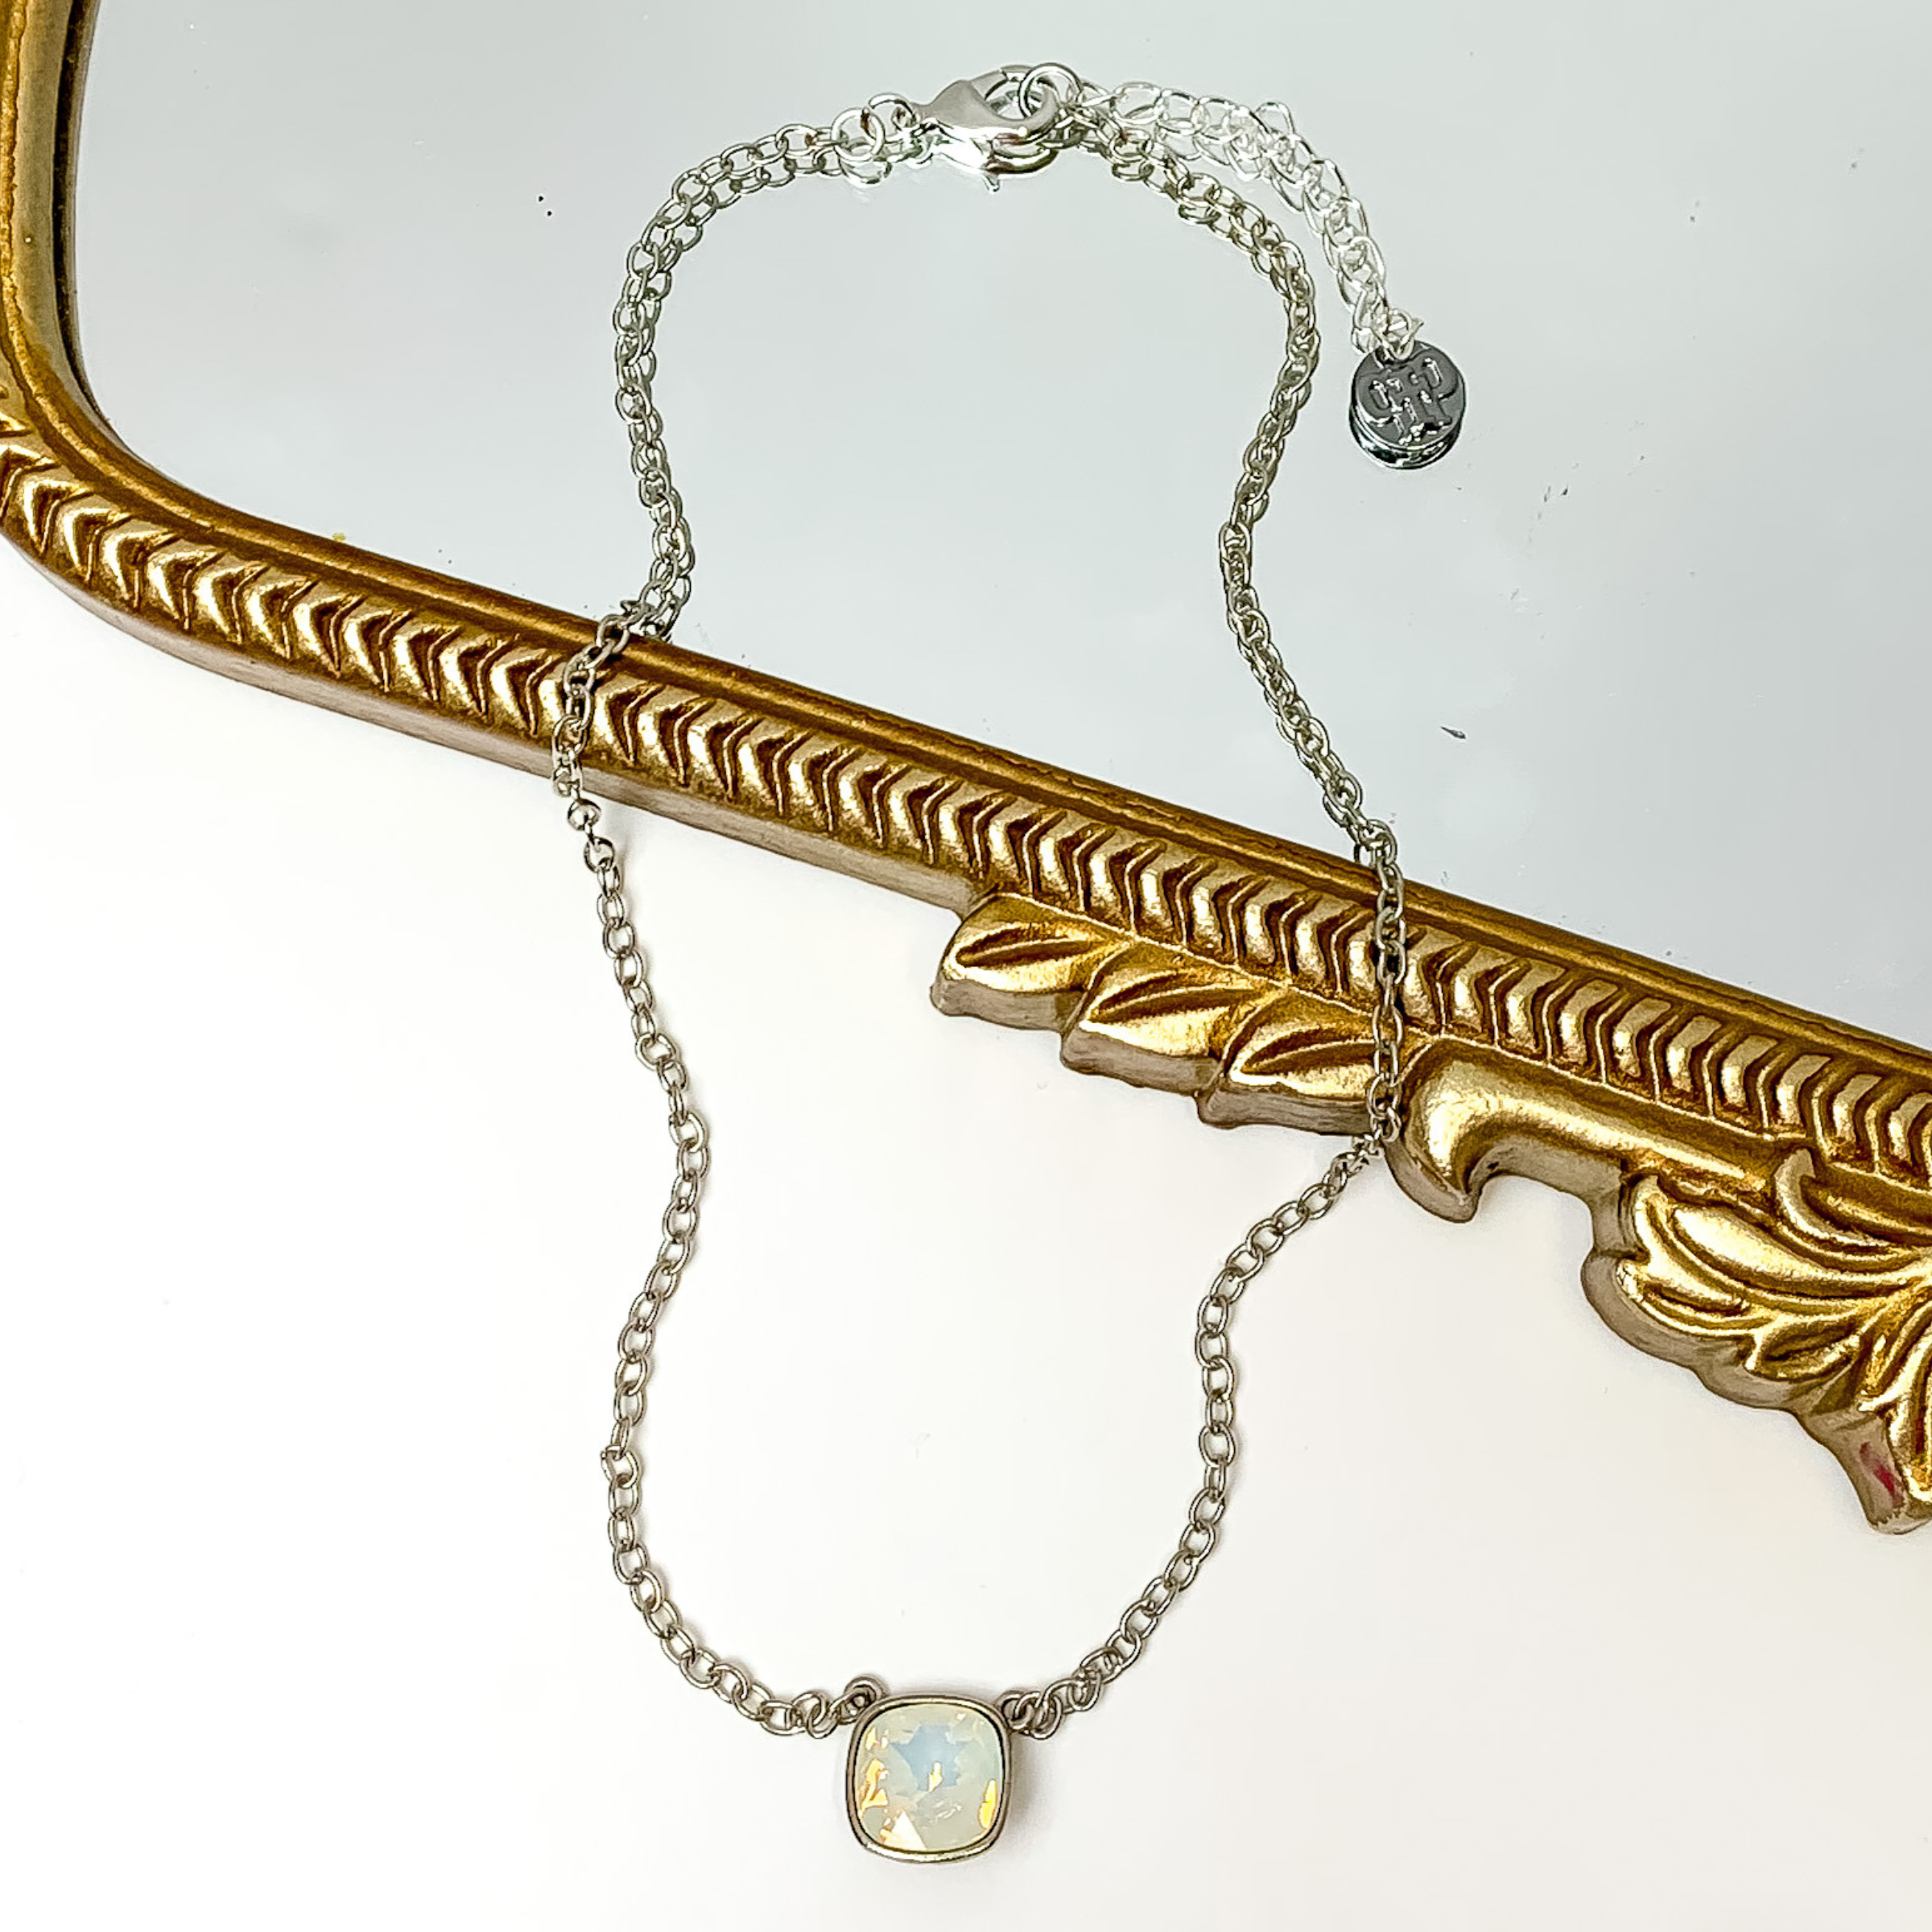 Silver chain necklace with a white opal cushion cut crystal. This necklace is pictured partially laying on a gold mirror on a white background.